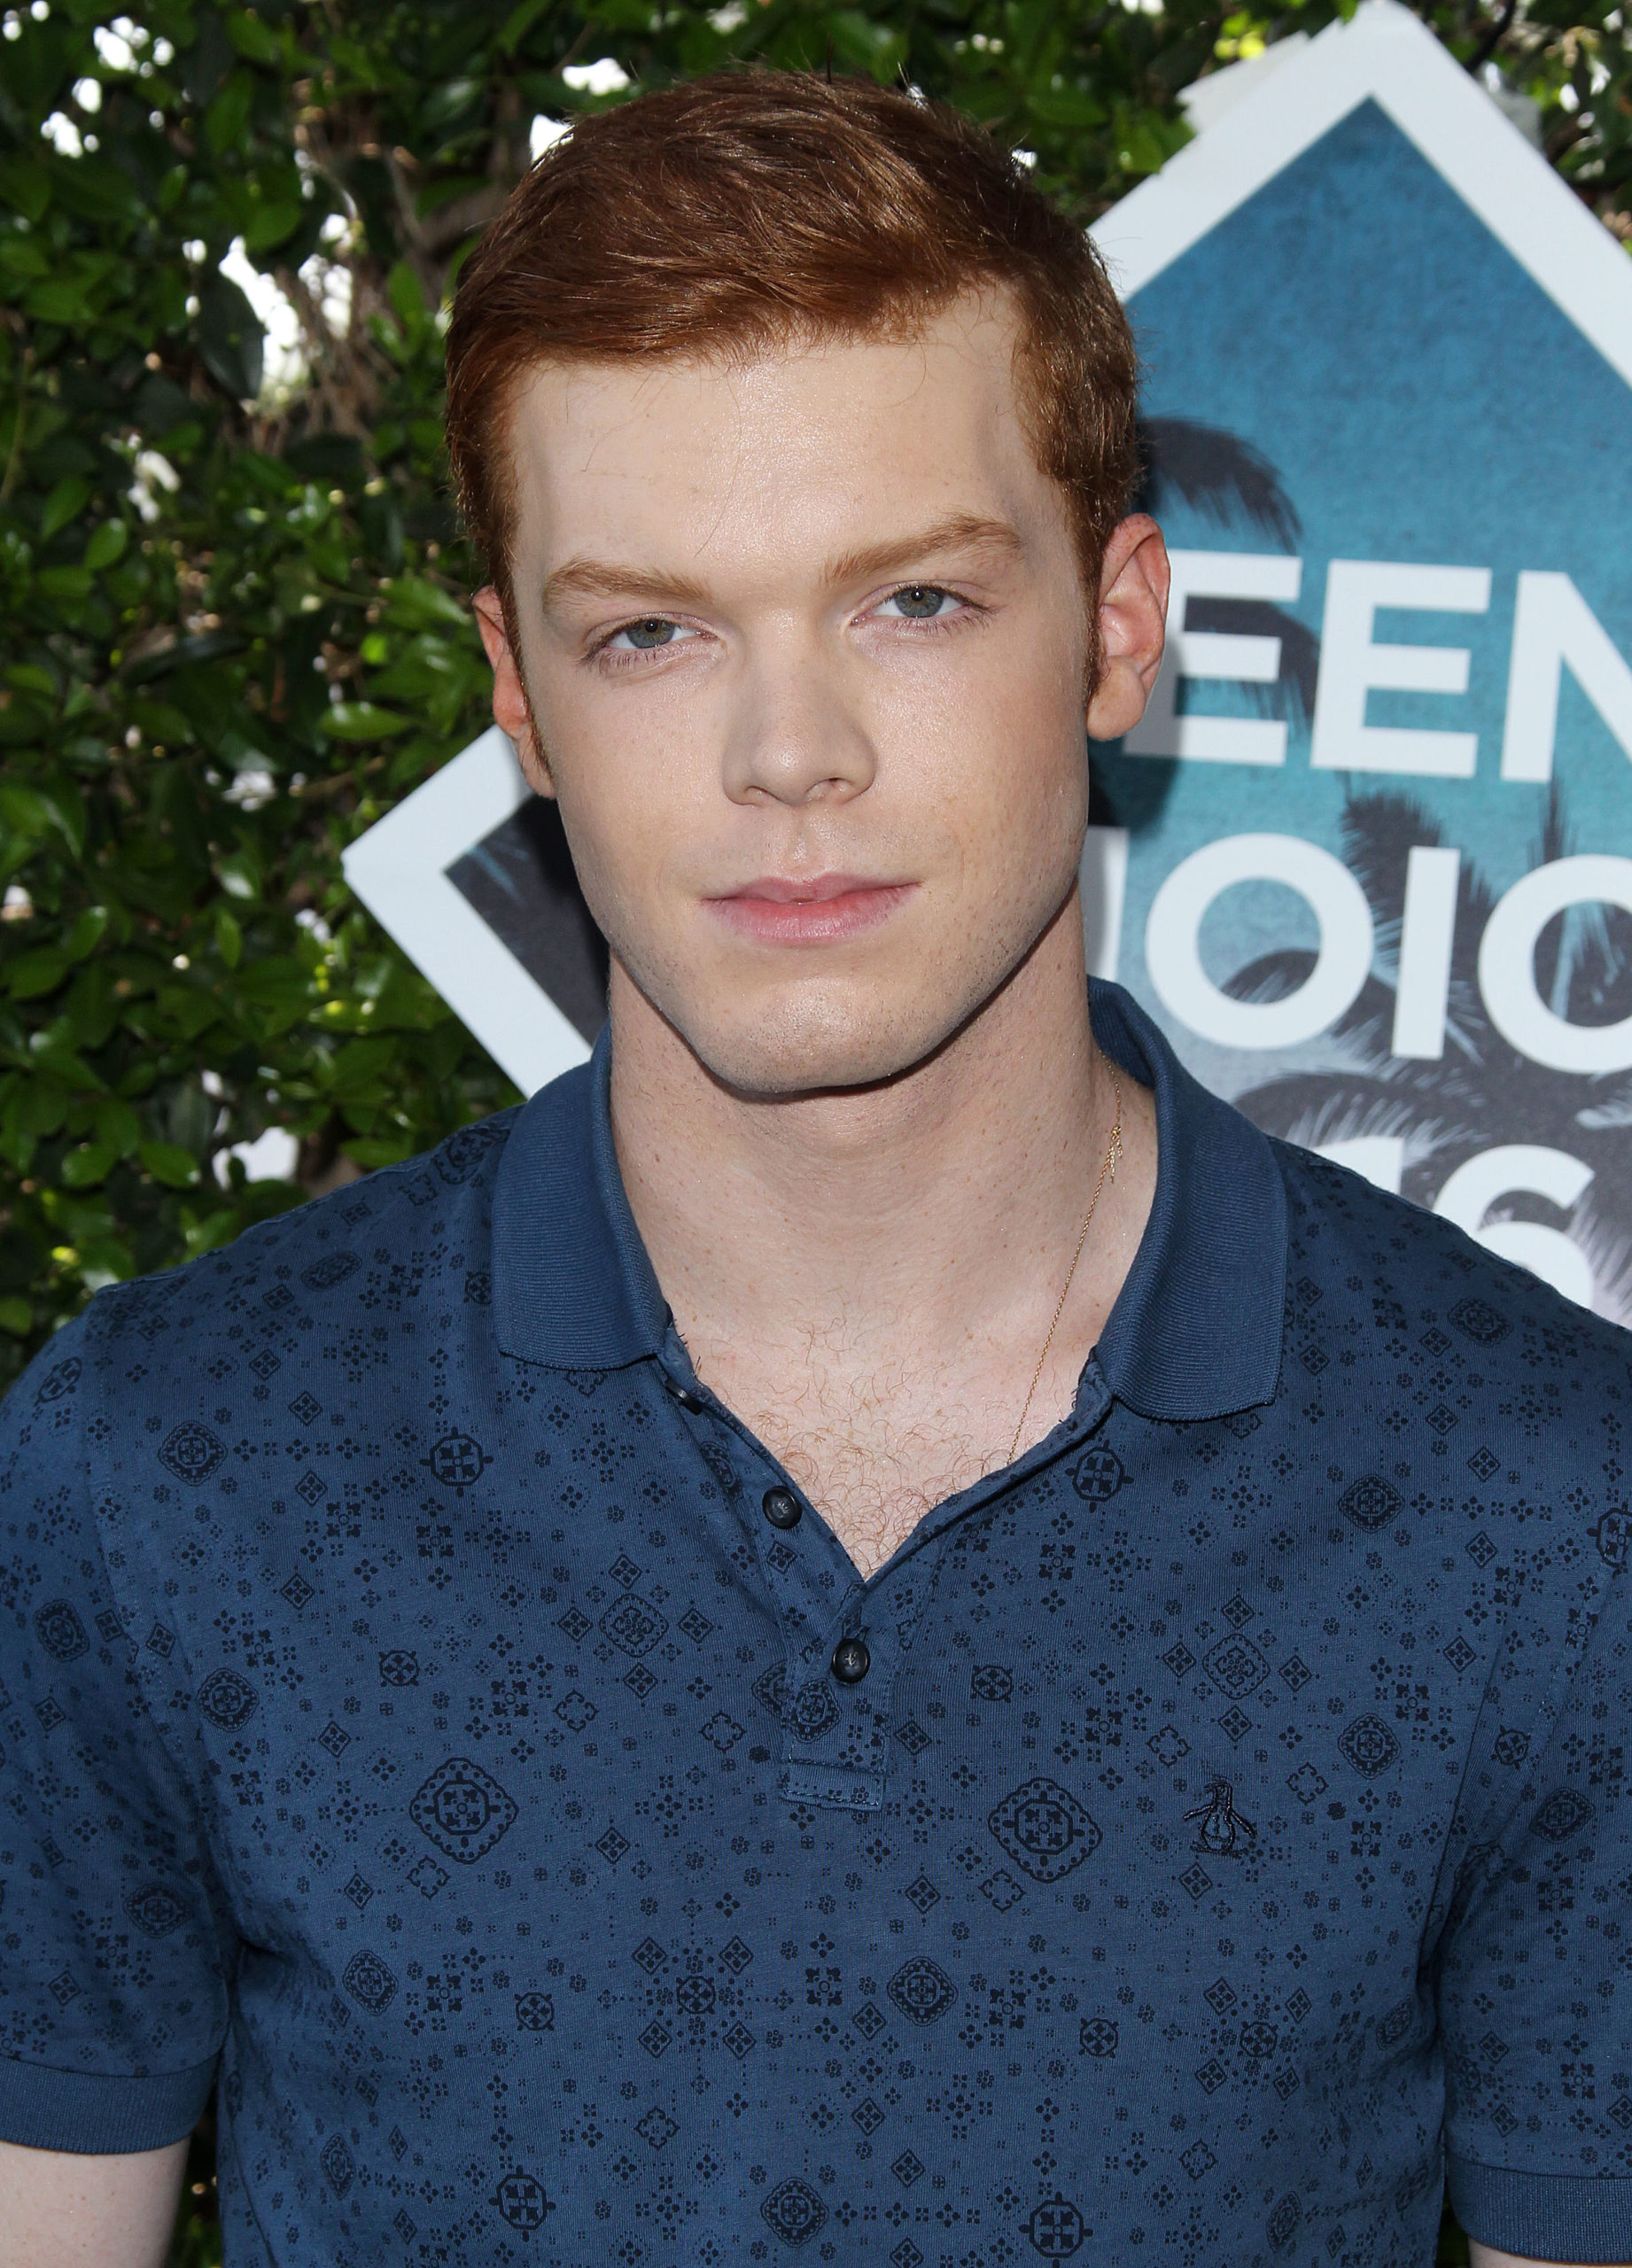 Short biography : Who is Cameron Monaghan.